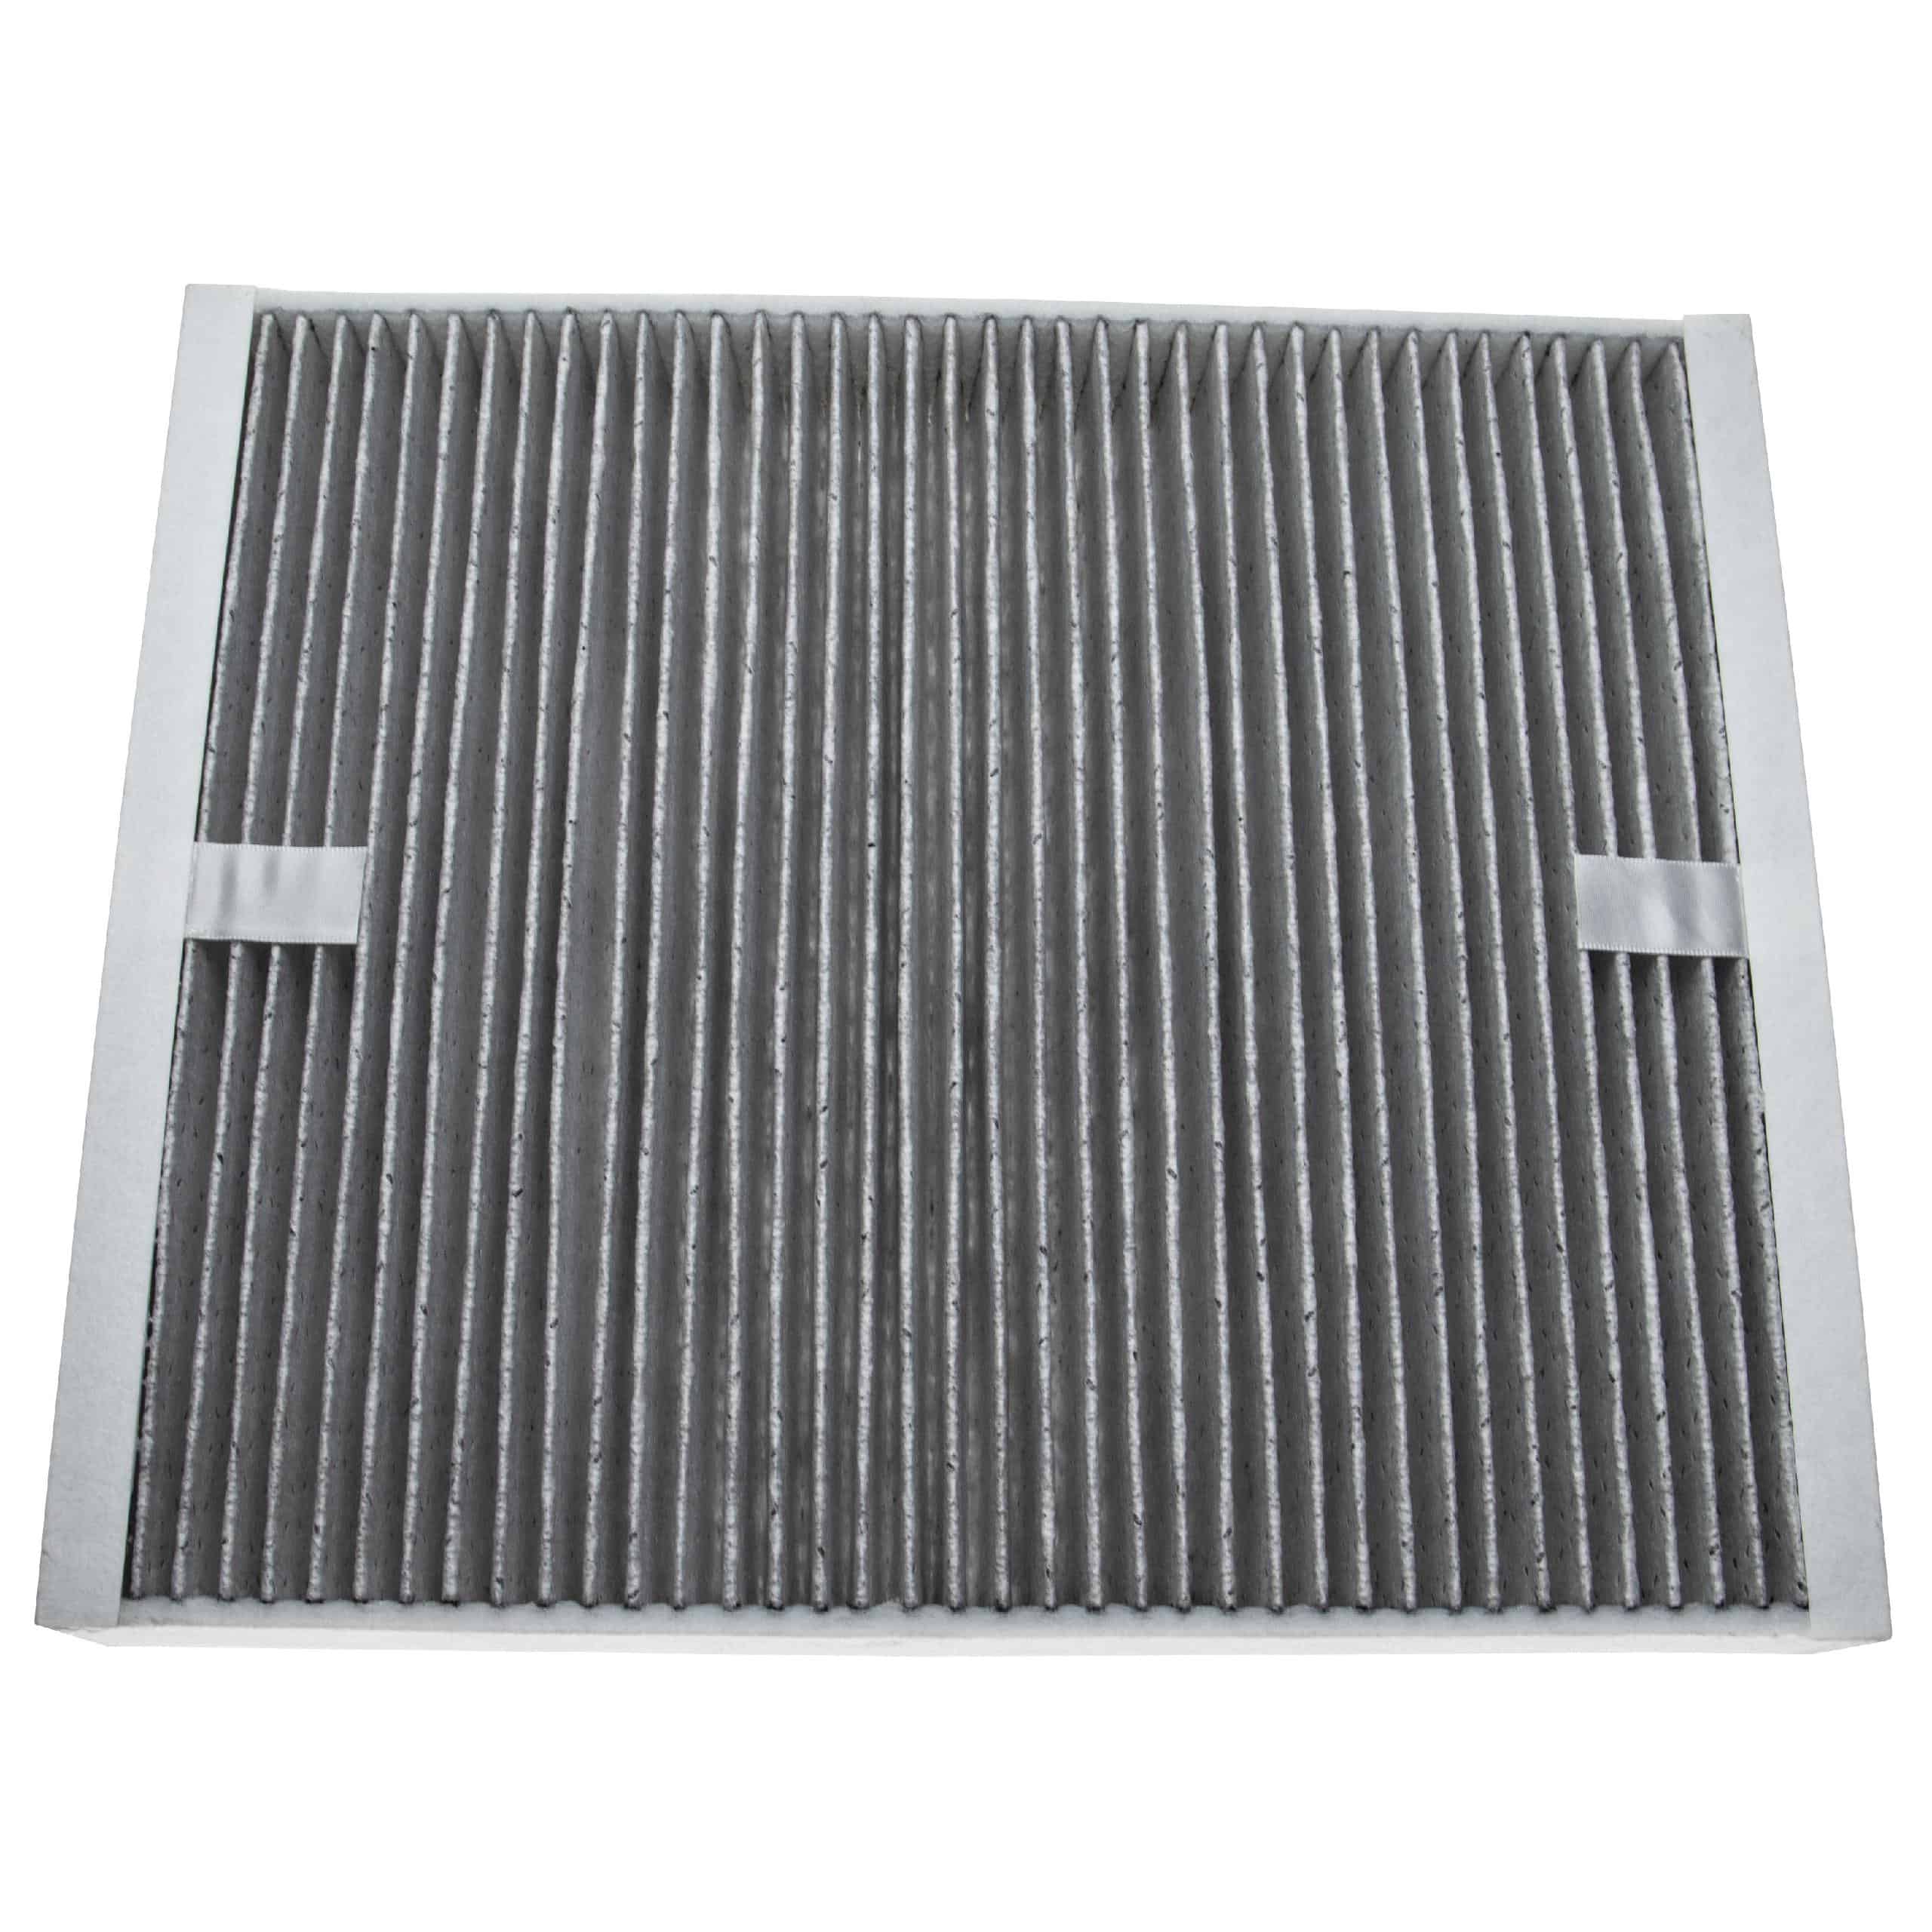 Filter as Replacement for Stadler Form R-114 - HEPA (H12) + Activated Carbon, 32.4 x 27 x 4.35 cm